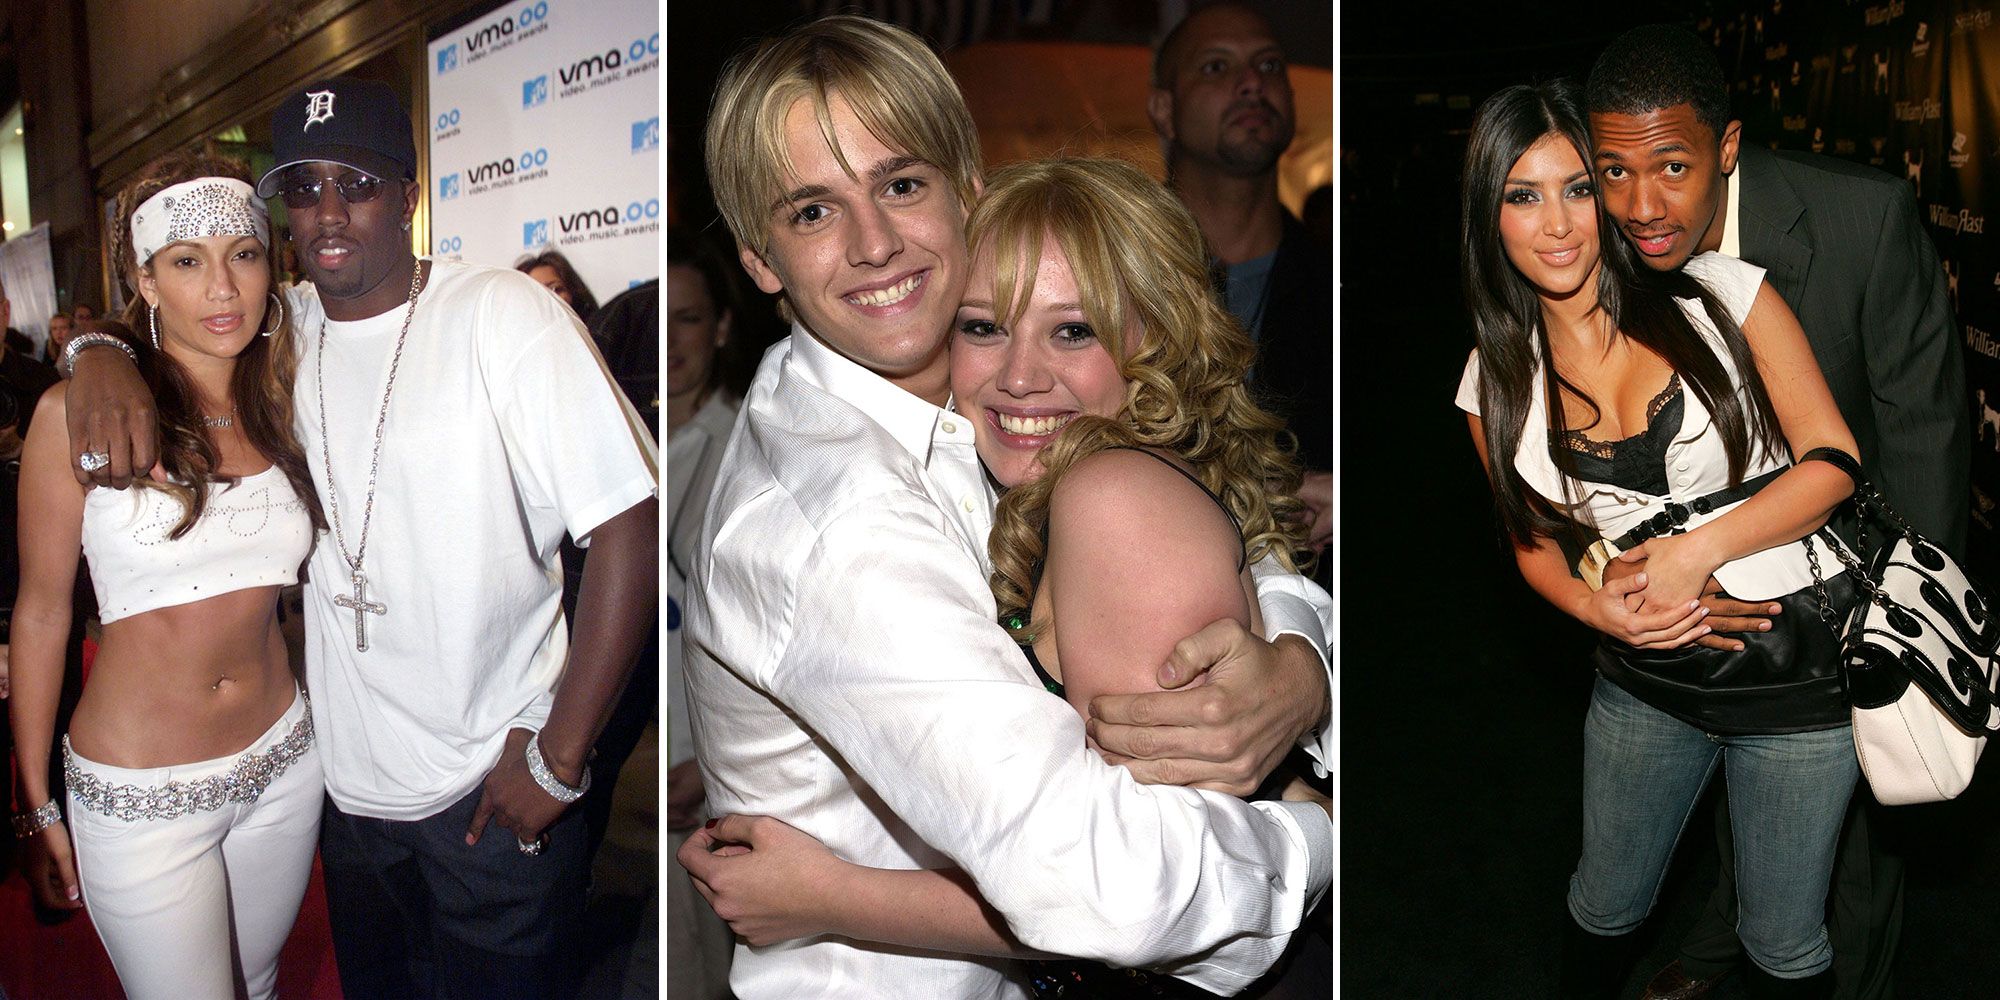 Celebrity Couples From The 2000s Make your own poses guide and divide them into several categories: celebrity couples from the 2000s